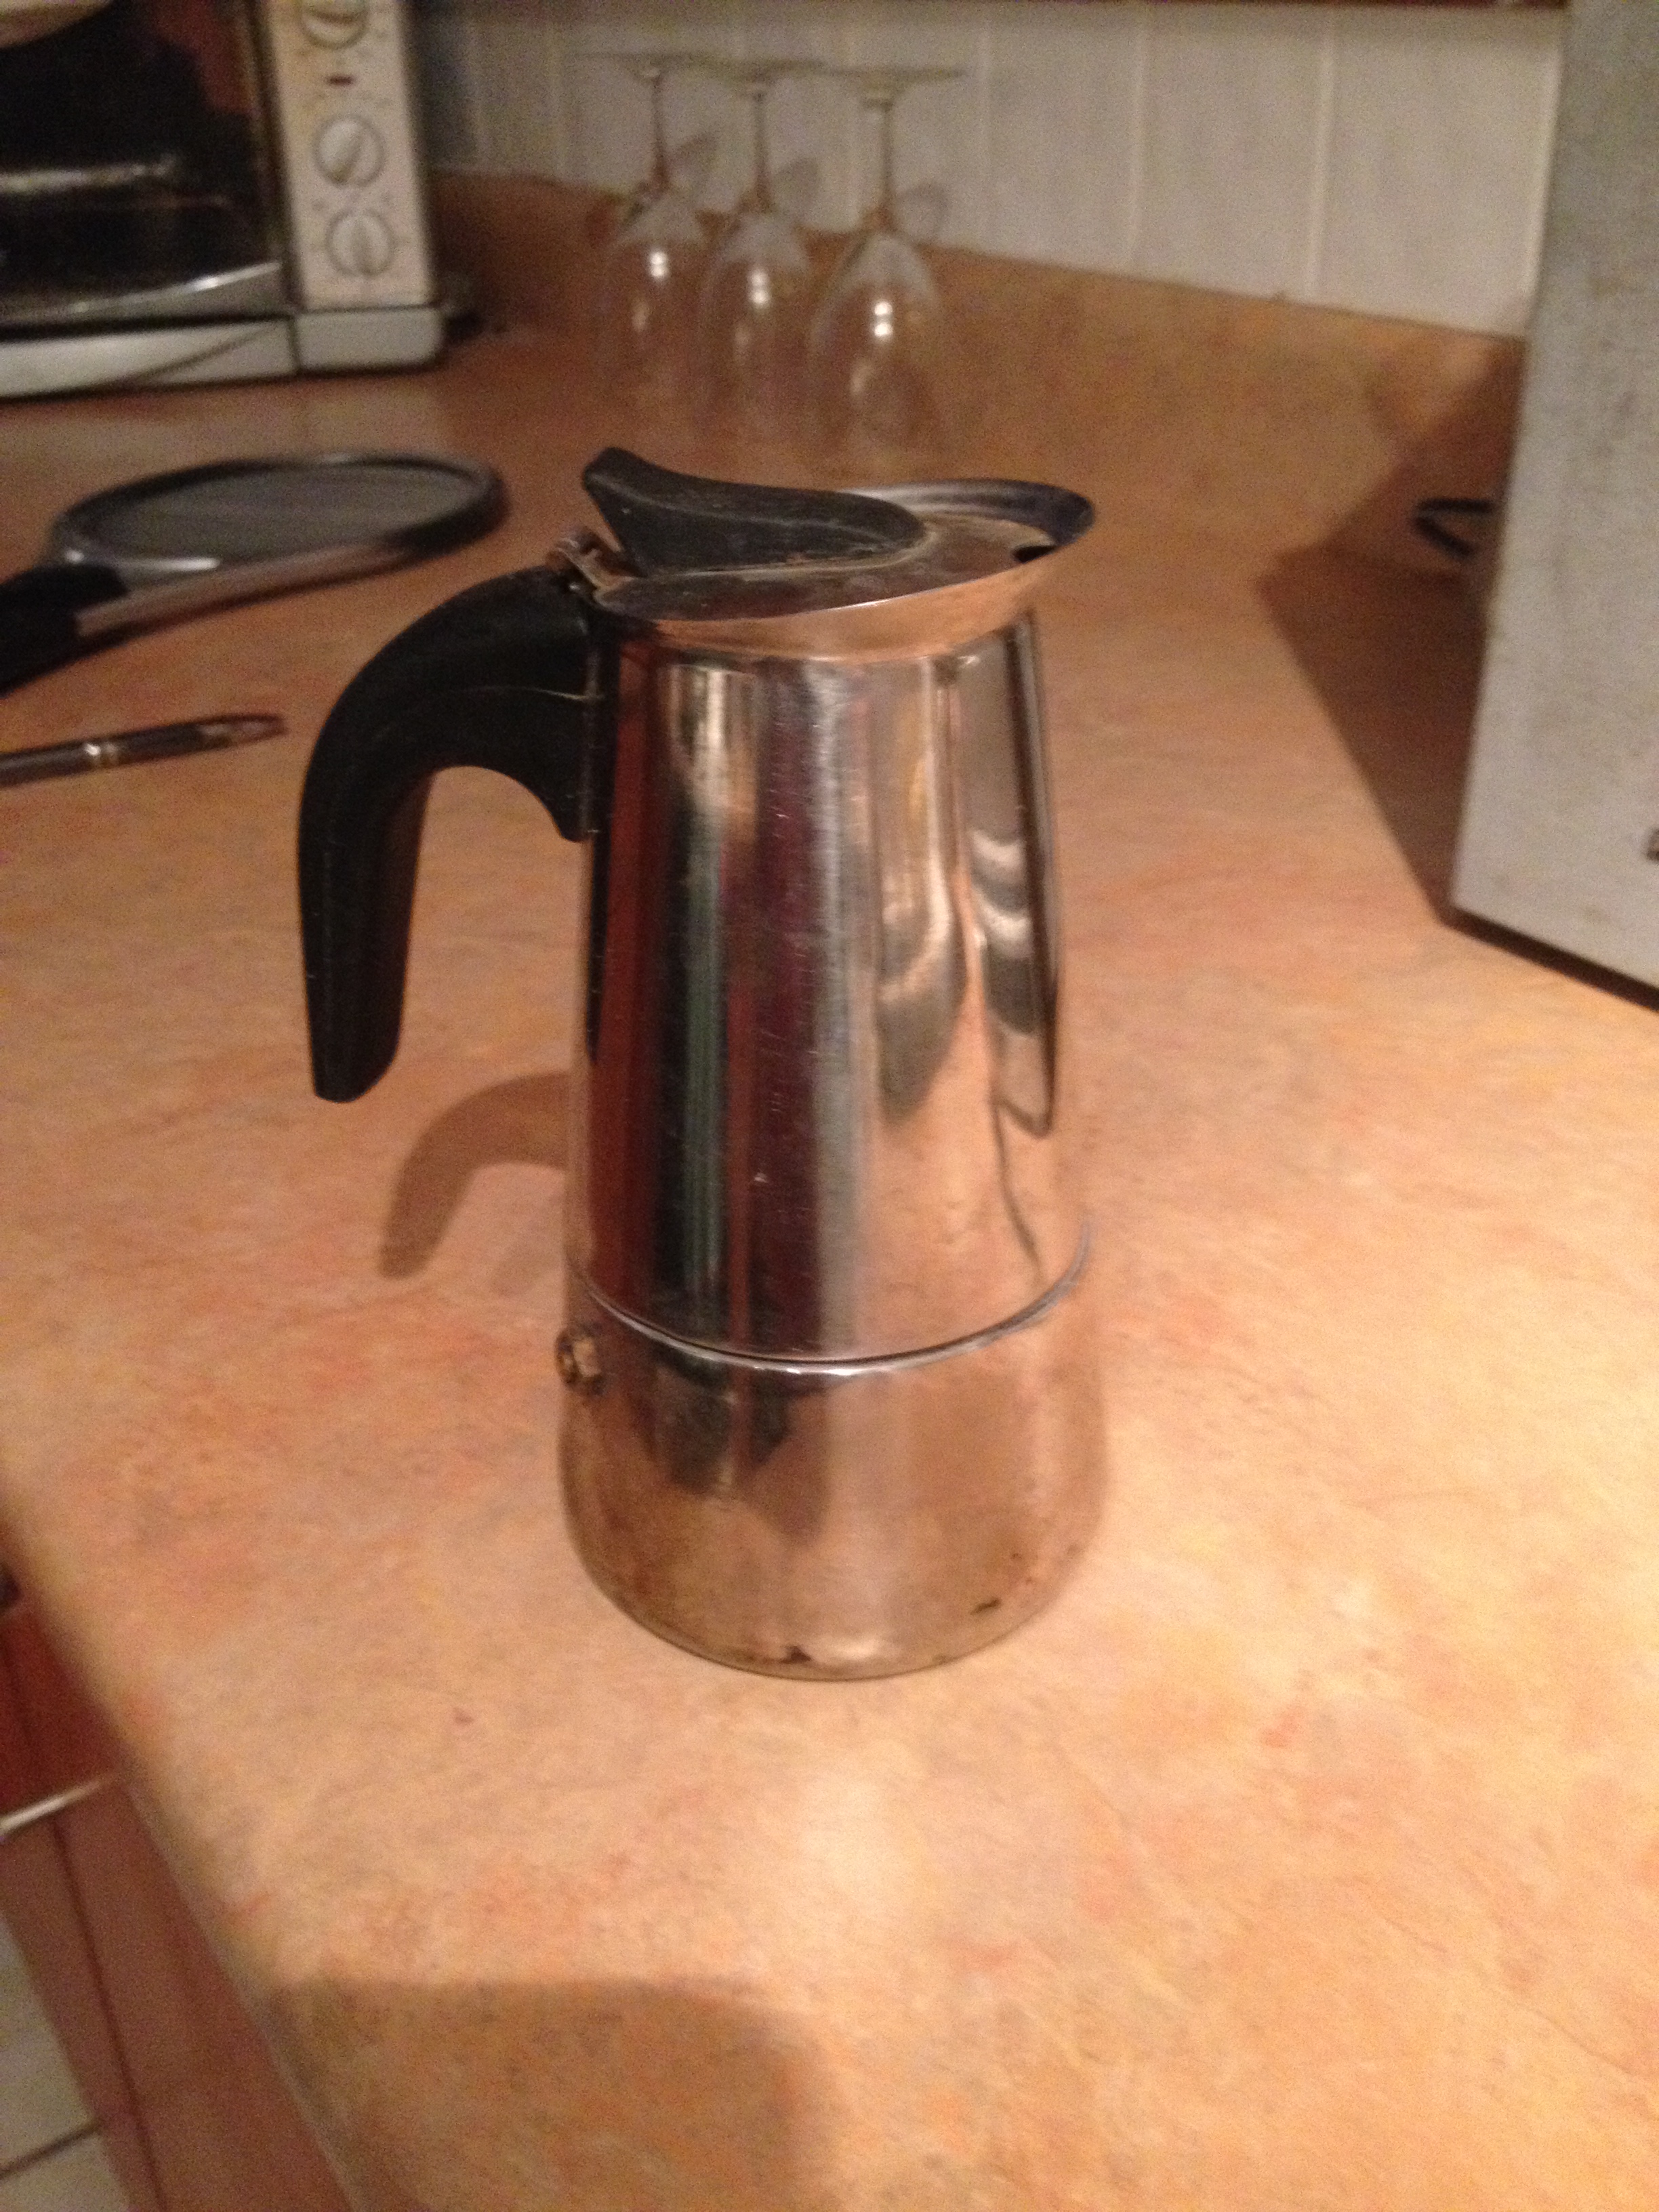 How to make coffee with an Espresso Maker /Greca using Cafe Bustelo! 